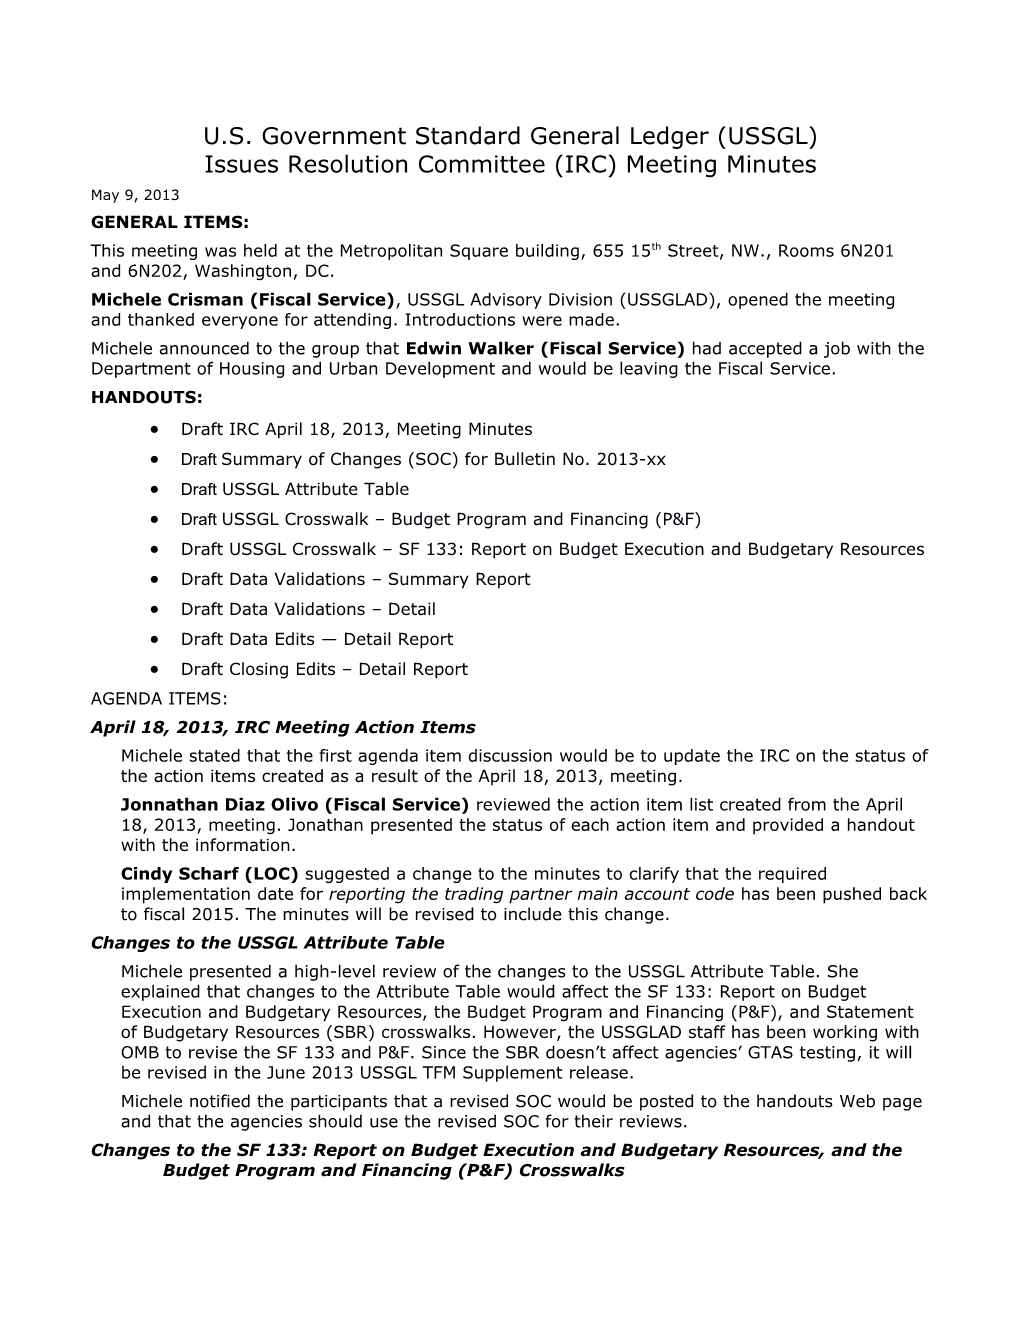 U.S. Government Standard General Ledger (USSGL) Issues Resolution Committee (IRC) Meeting